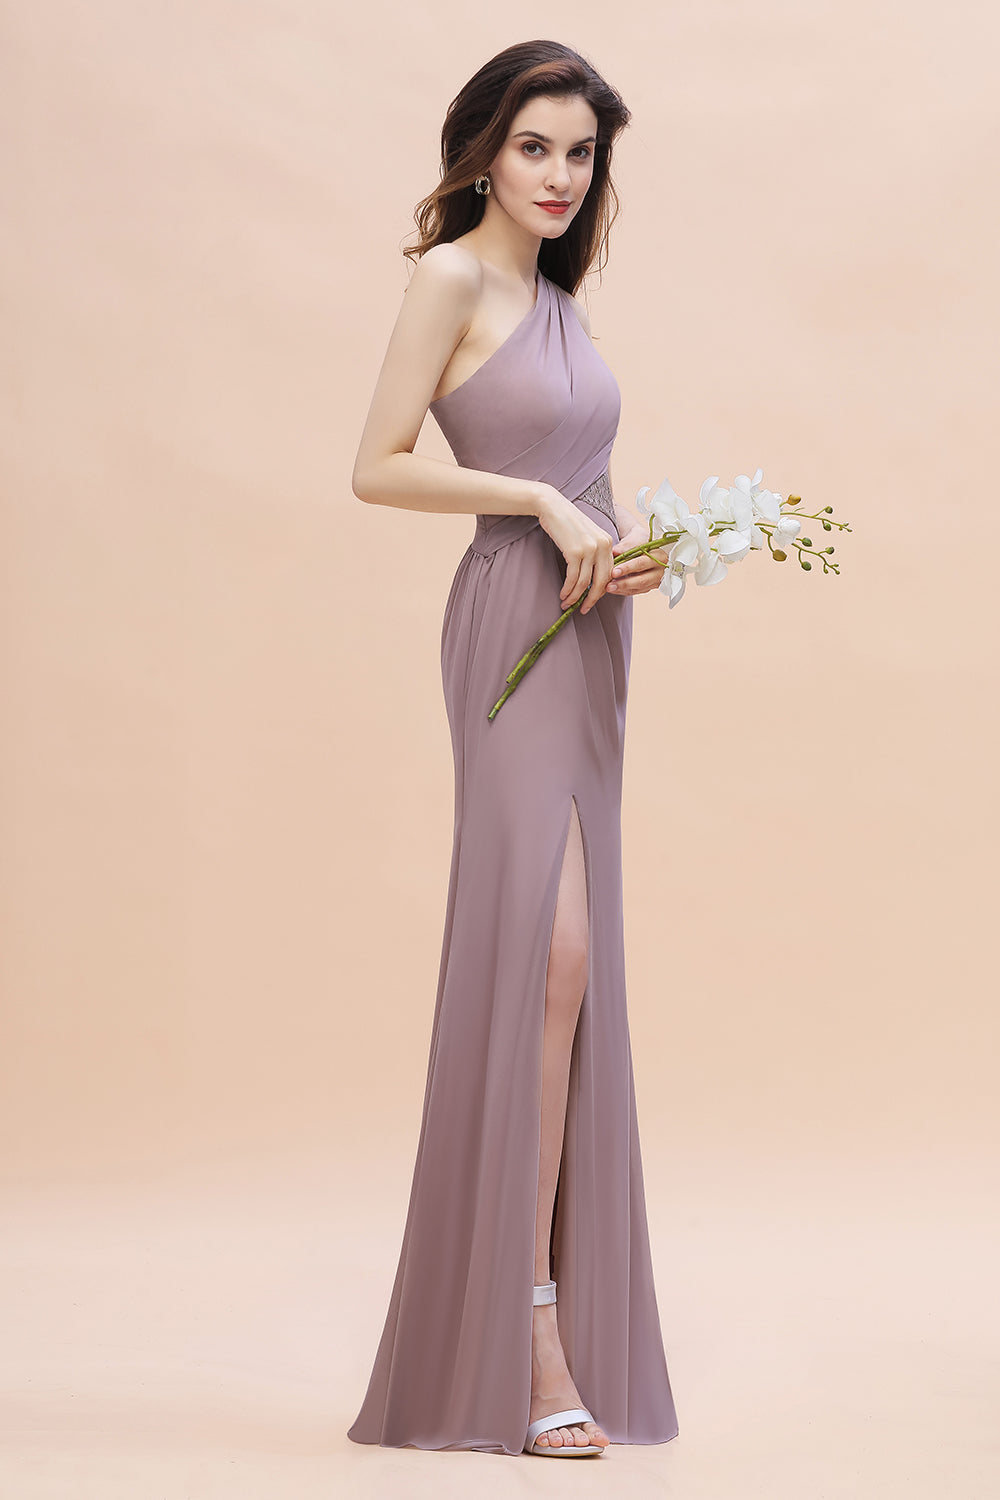 Chic One-Shoulder Dusk Chiffon Lace Ruffle Bridesmaid Dress with Front Slit On Sale